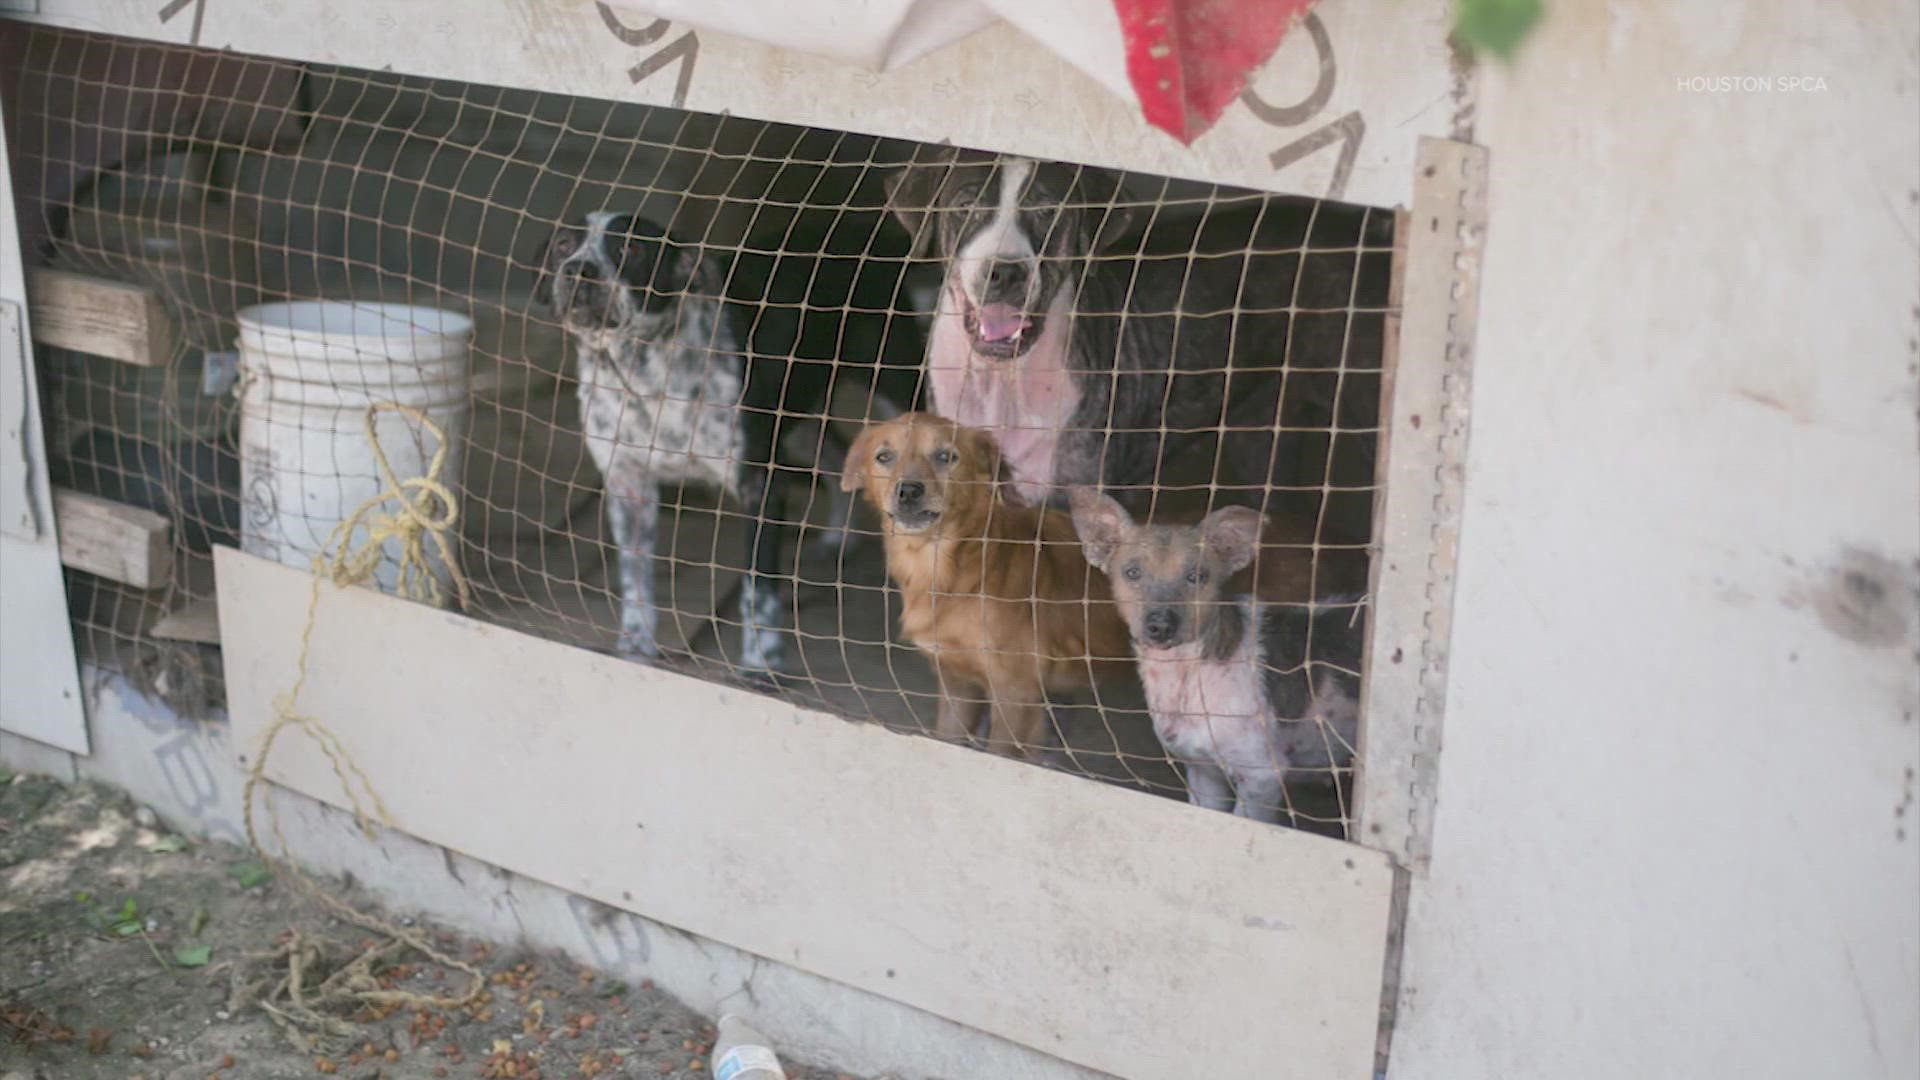 Houston SPCA said the property was overrun with feces and garbage.